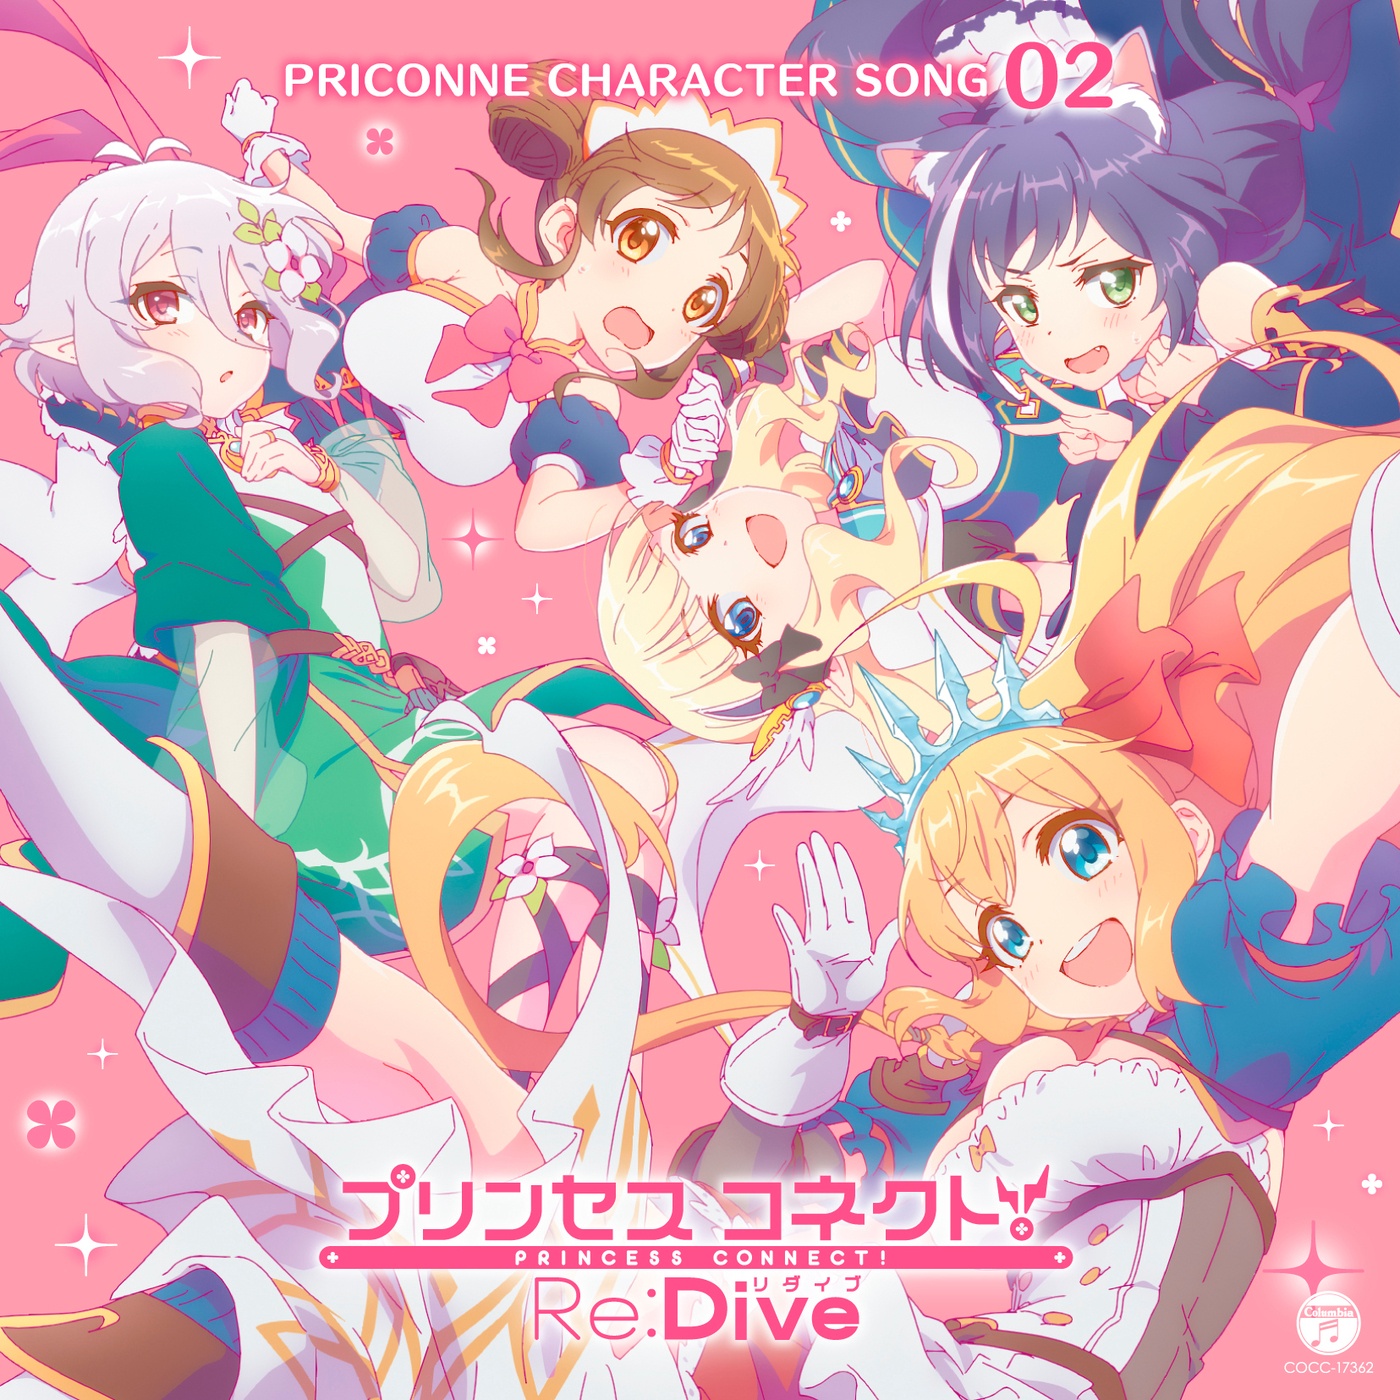 ! Re: Dive PRICONNE CHARACTER SONG 02